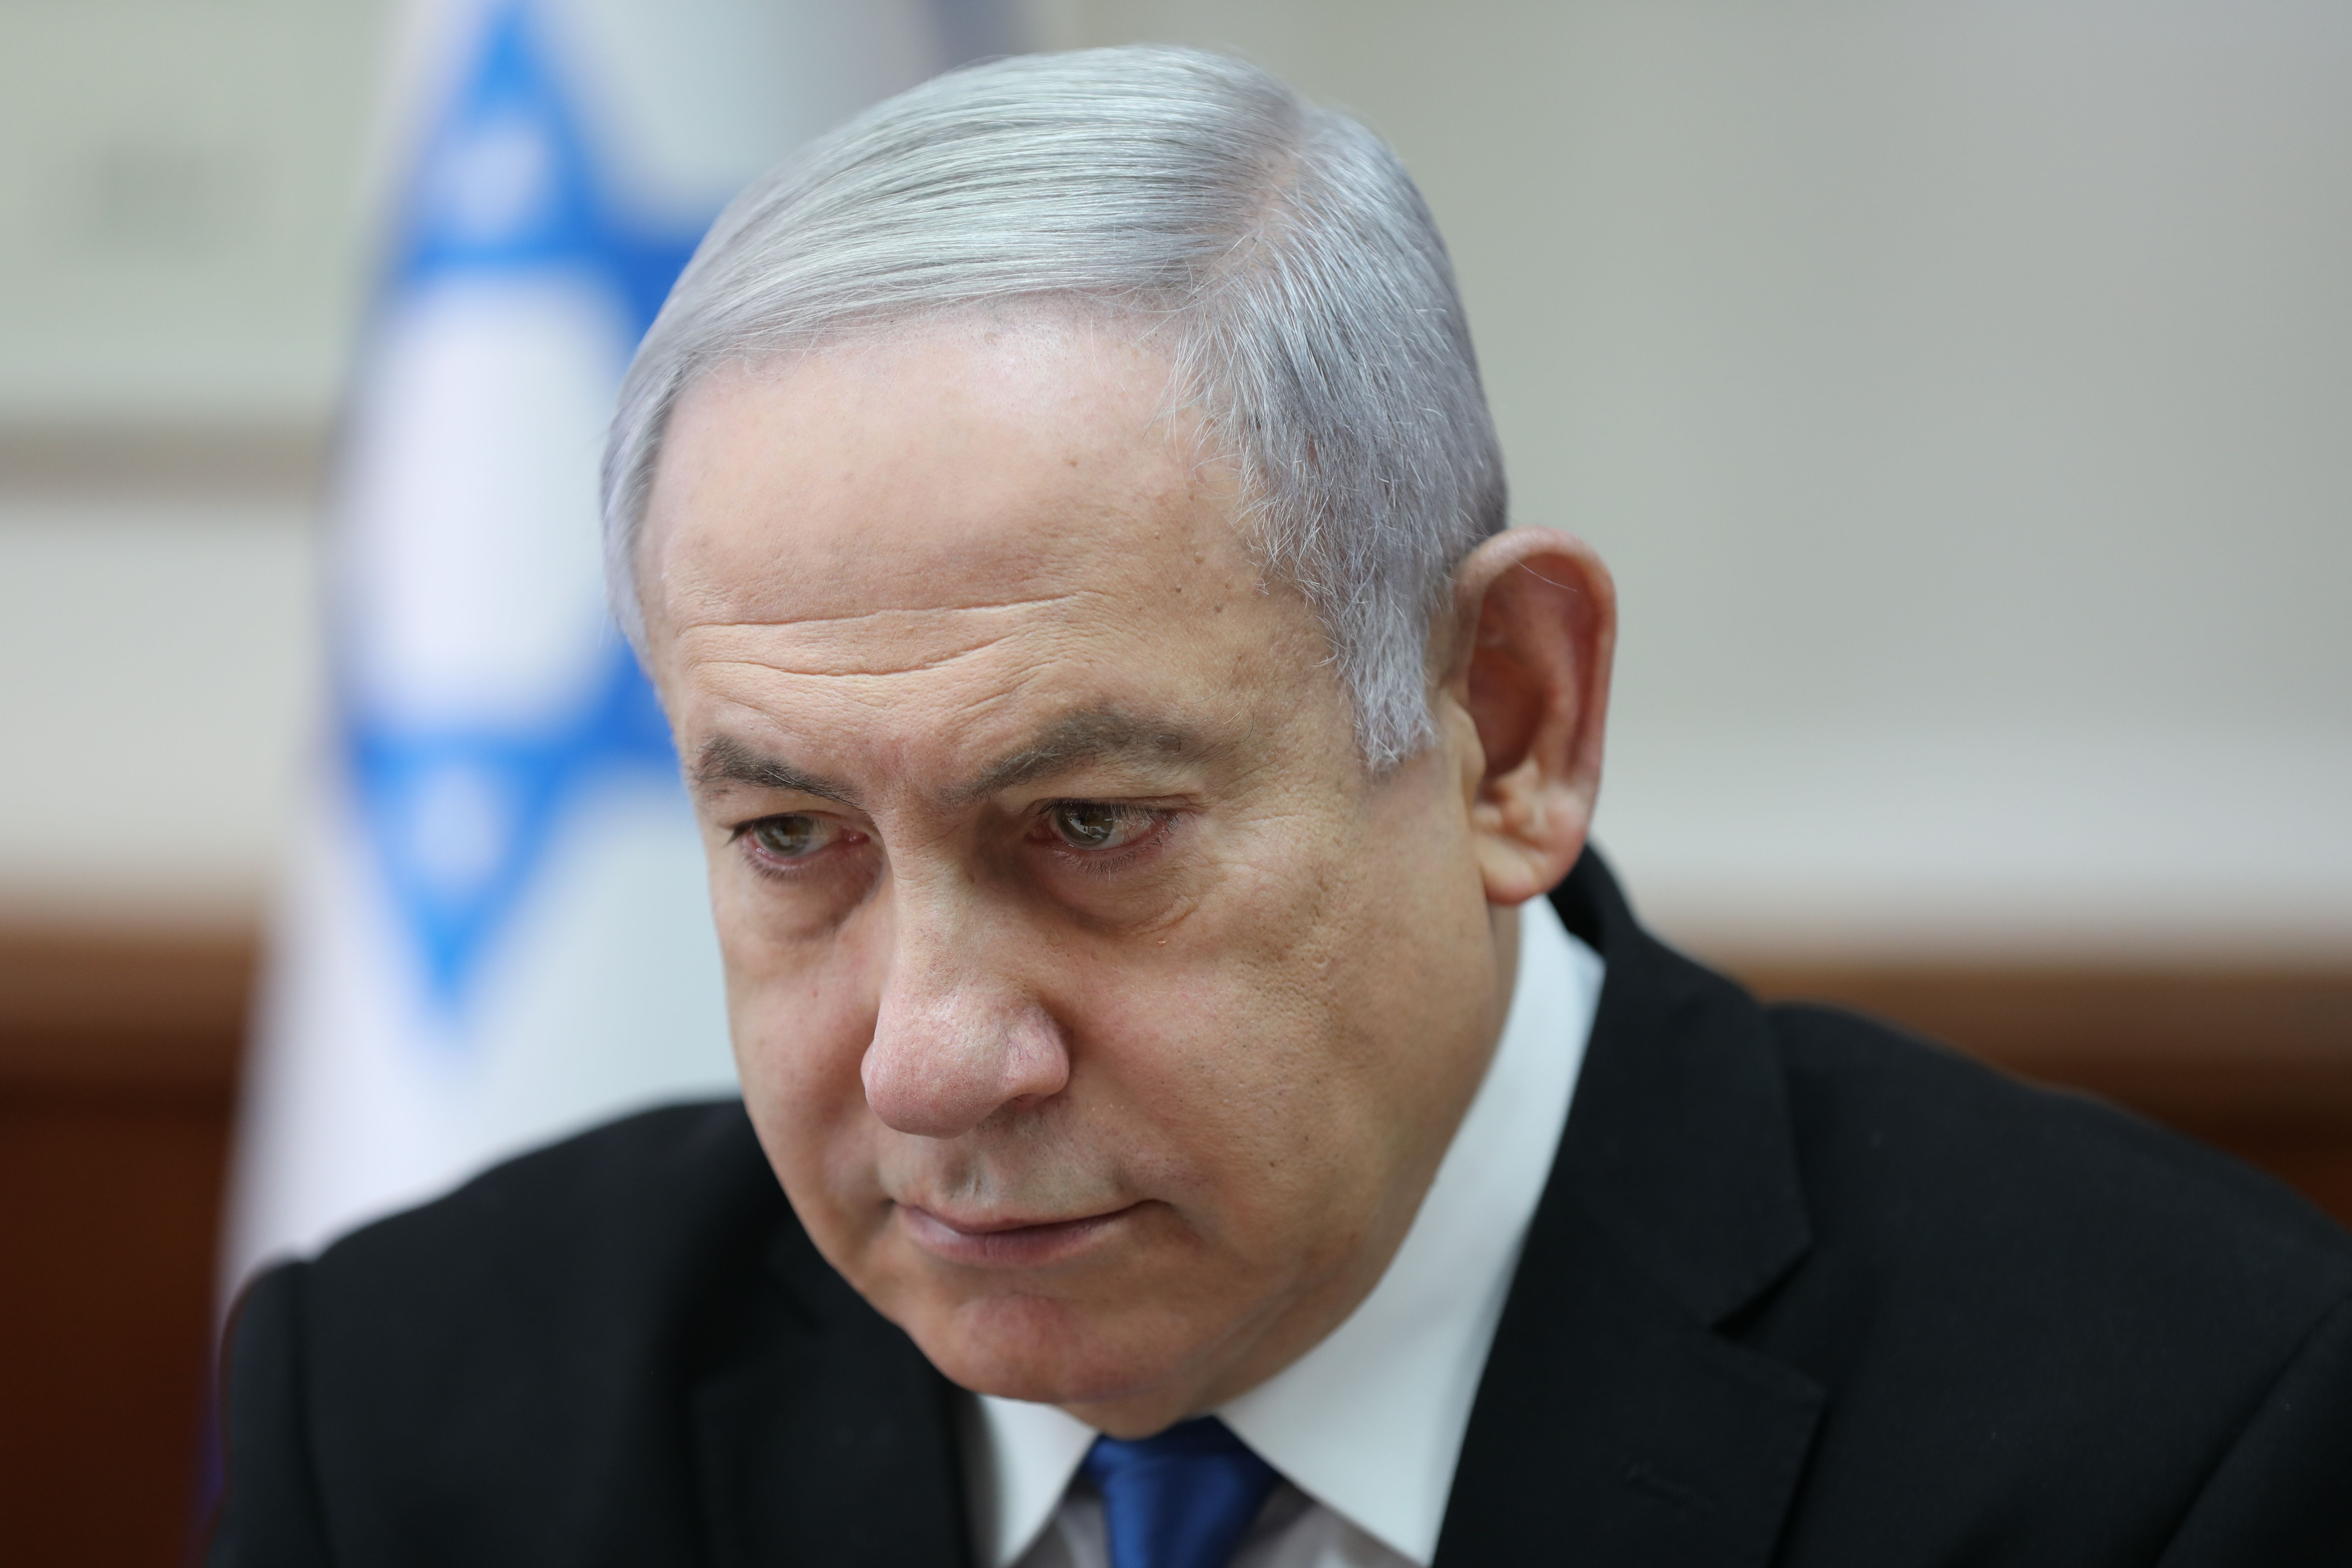 With Counting Almost Completed, Netanyahu Short of 61-seat Majority